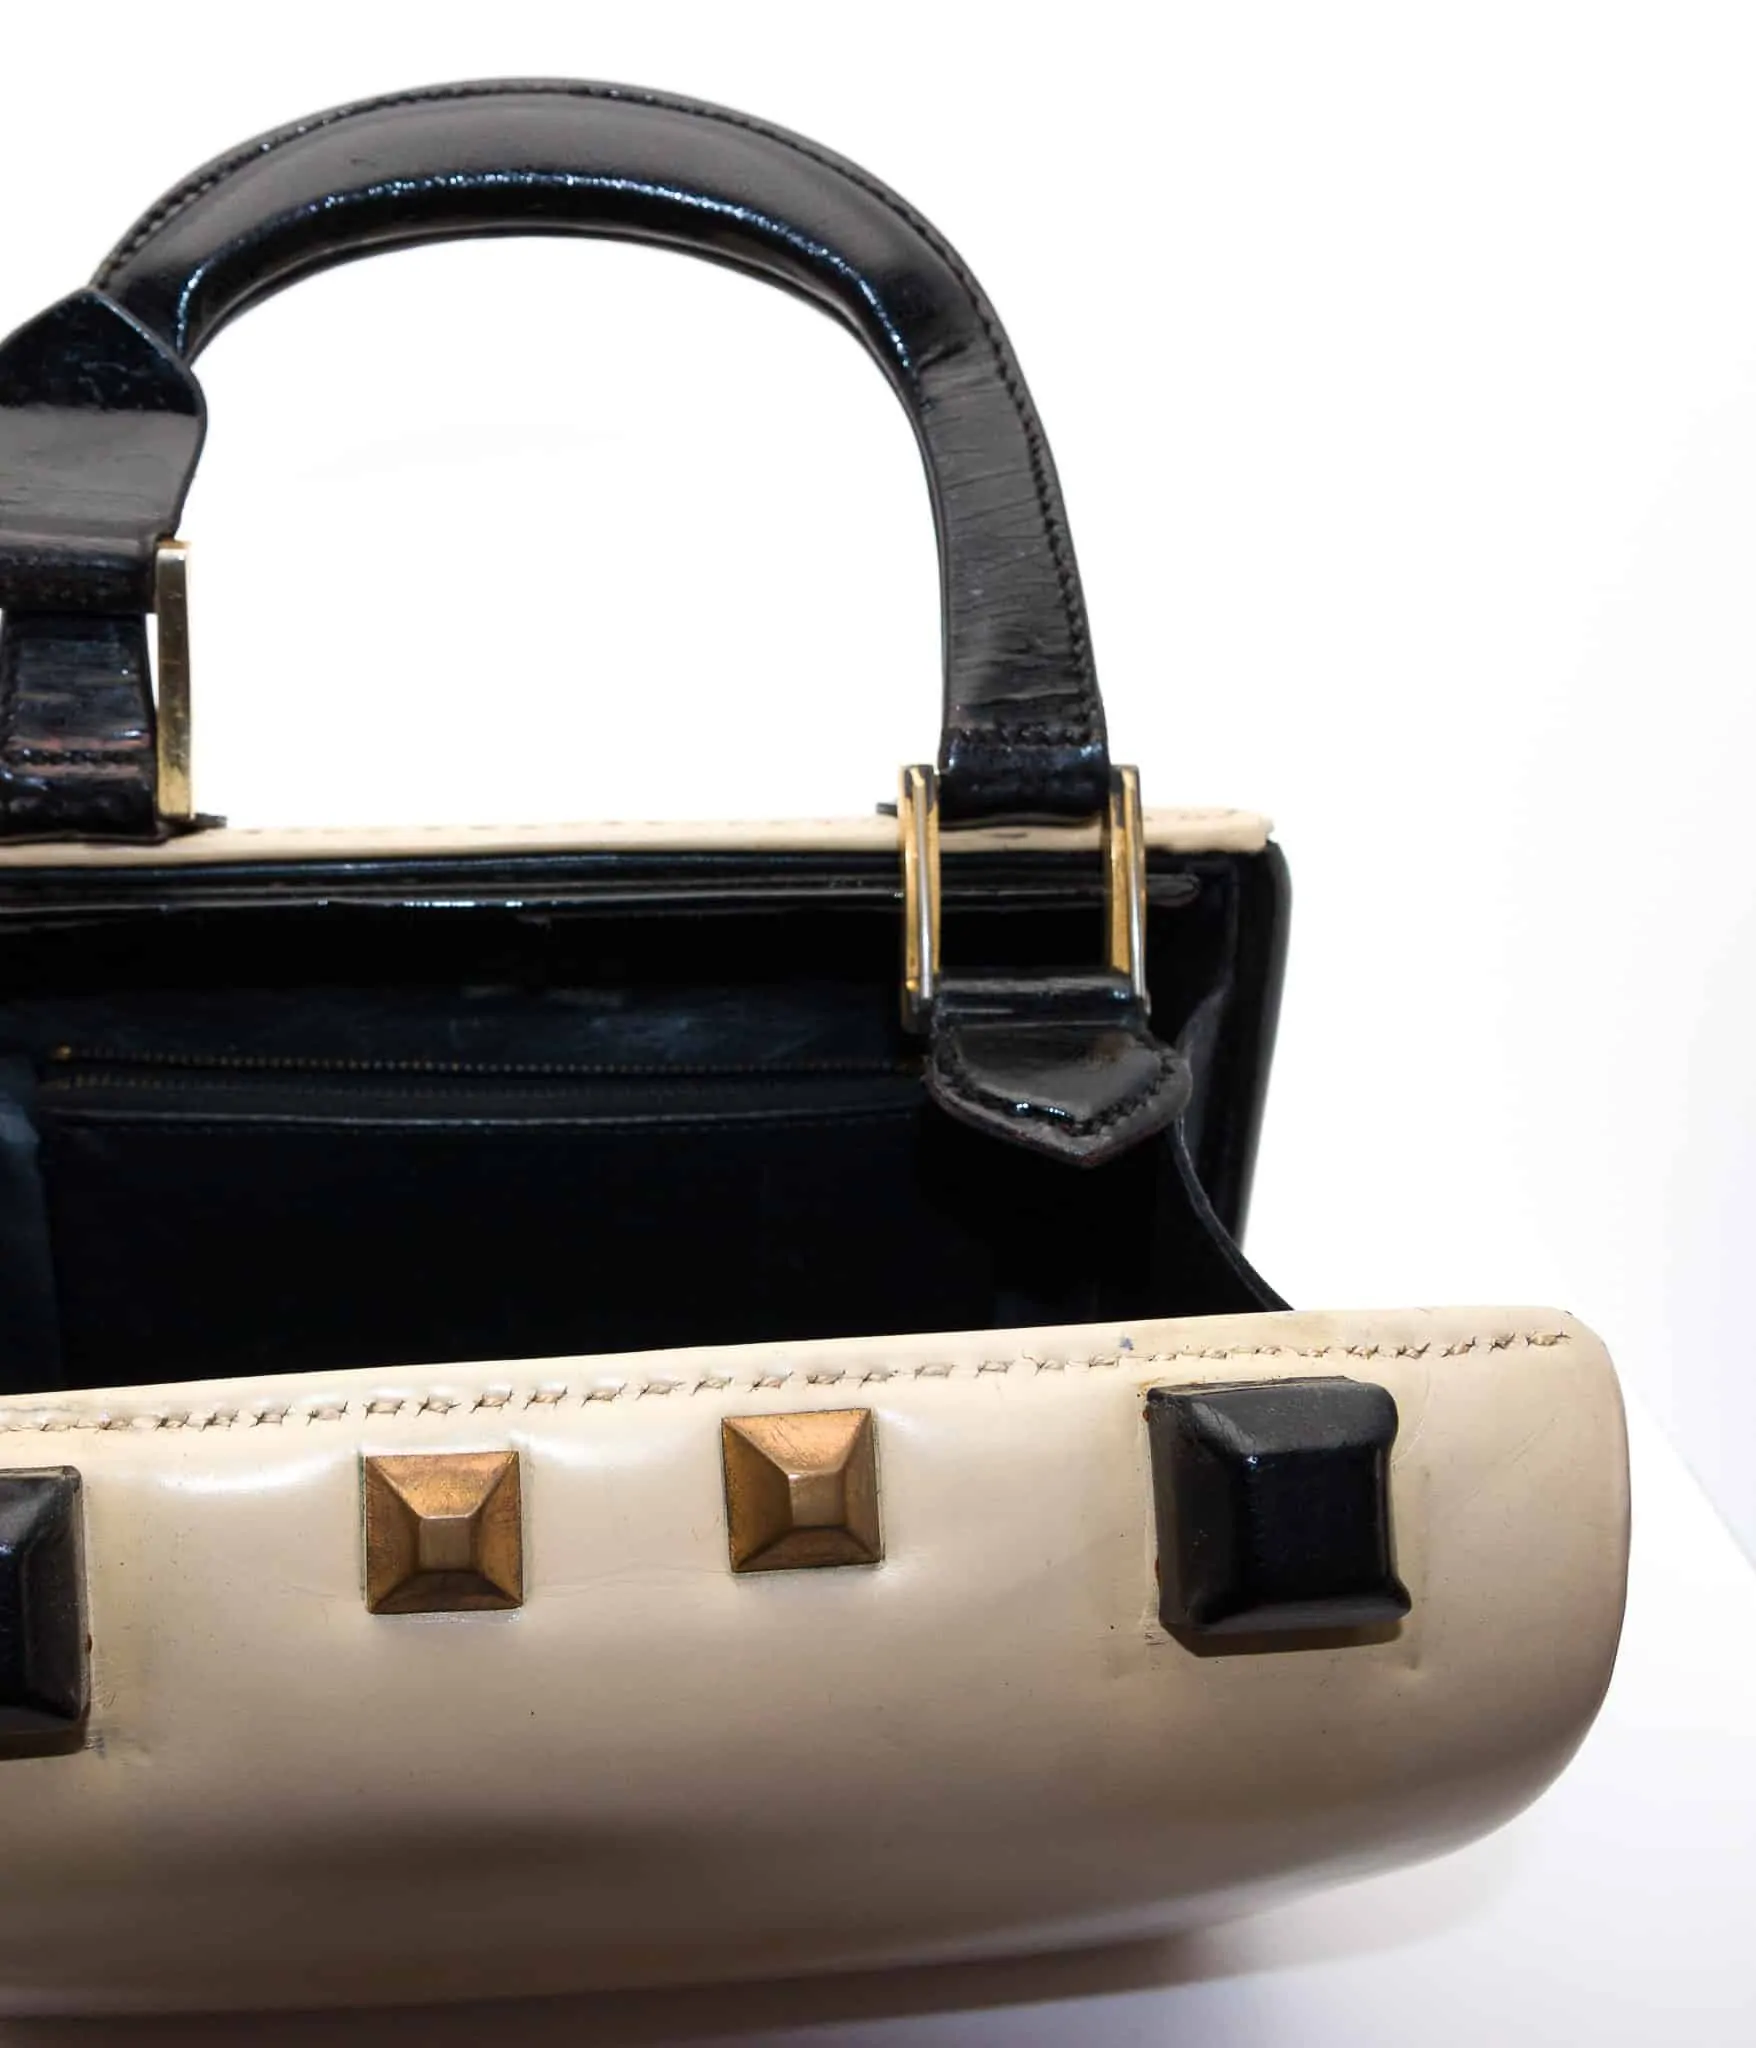 1950s Purses & Handbags: Styles, Trends & Pictures